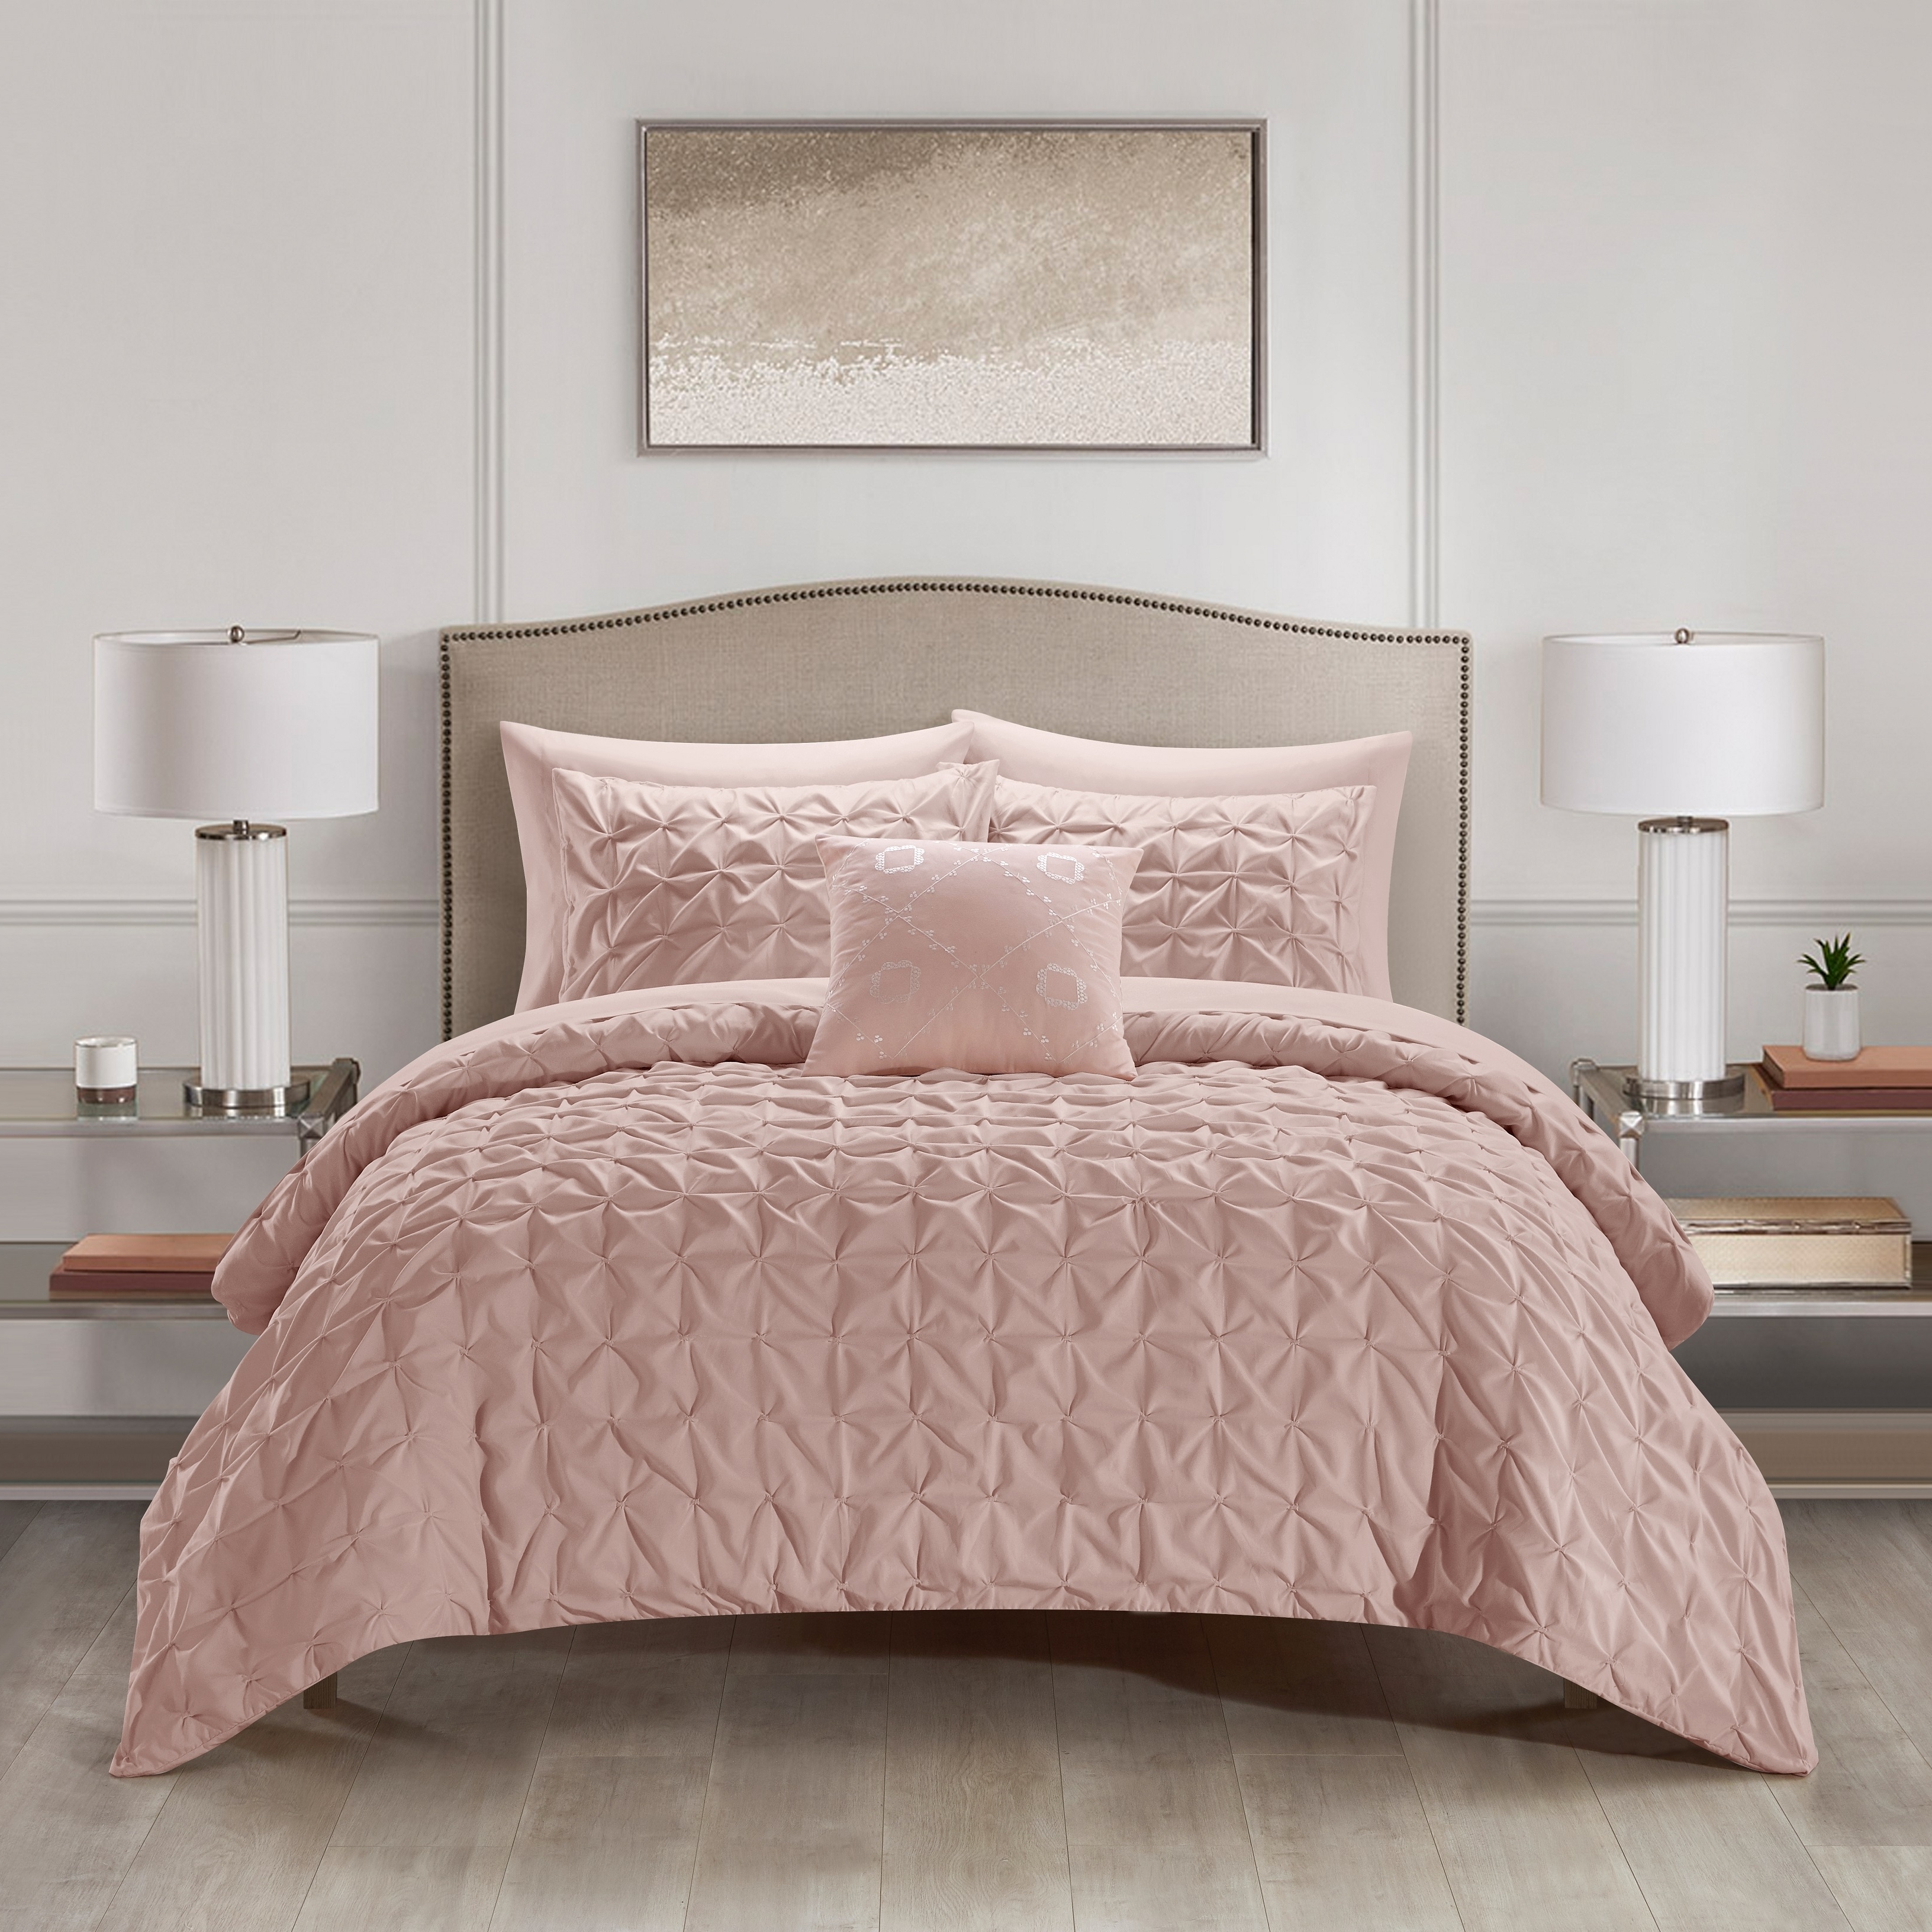 Edison 8 Or 6 Piece Comforter Set Pinch Pleat Box Design Bed In A Bag Bedding - Blush, Twin - 6 Piece